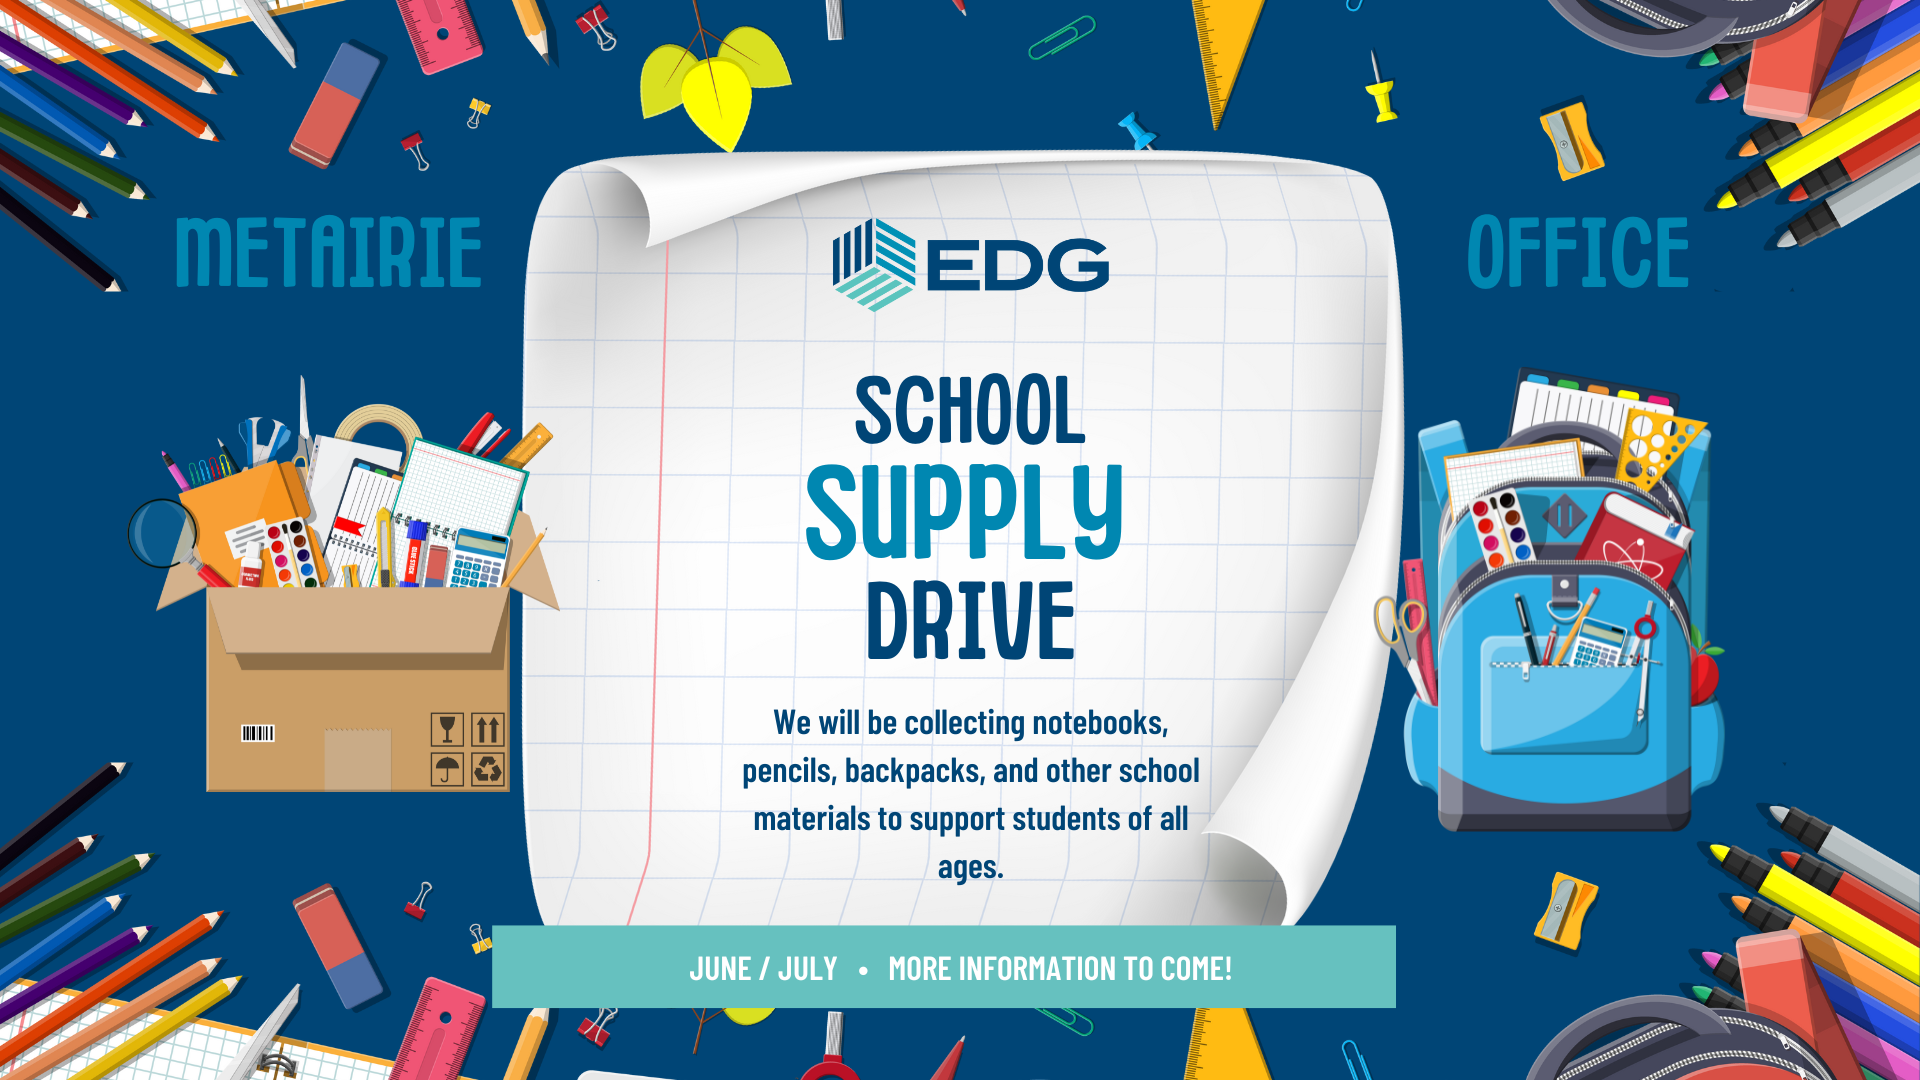 EDG Metairie School Supply Drive announcement on a loose leaf piece of paper with school supplies in the background.